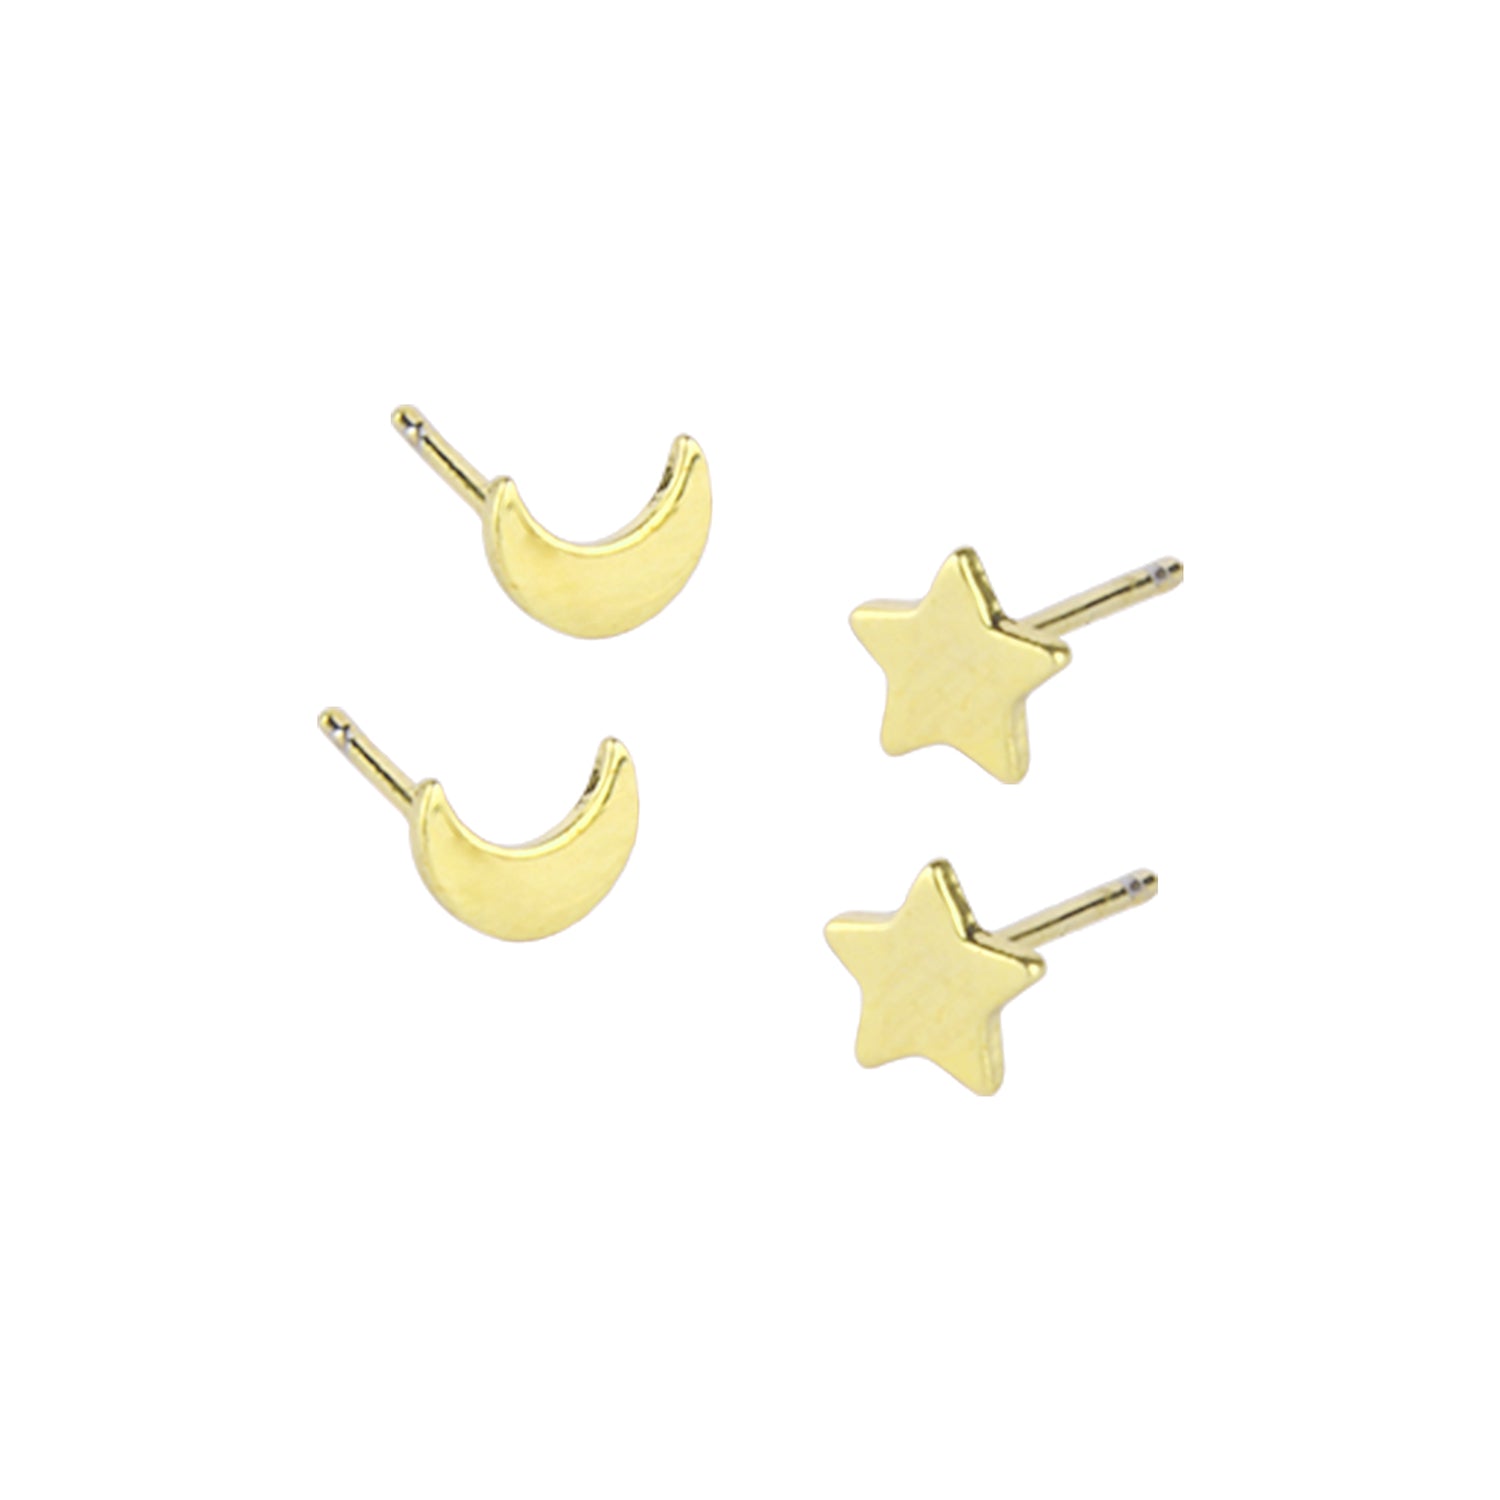 Real Gold Plated Star & Moon Stud Mismatch Earring For Women By Accessorize London